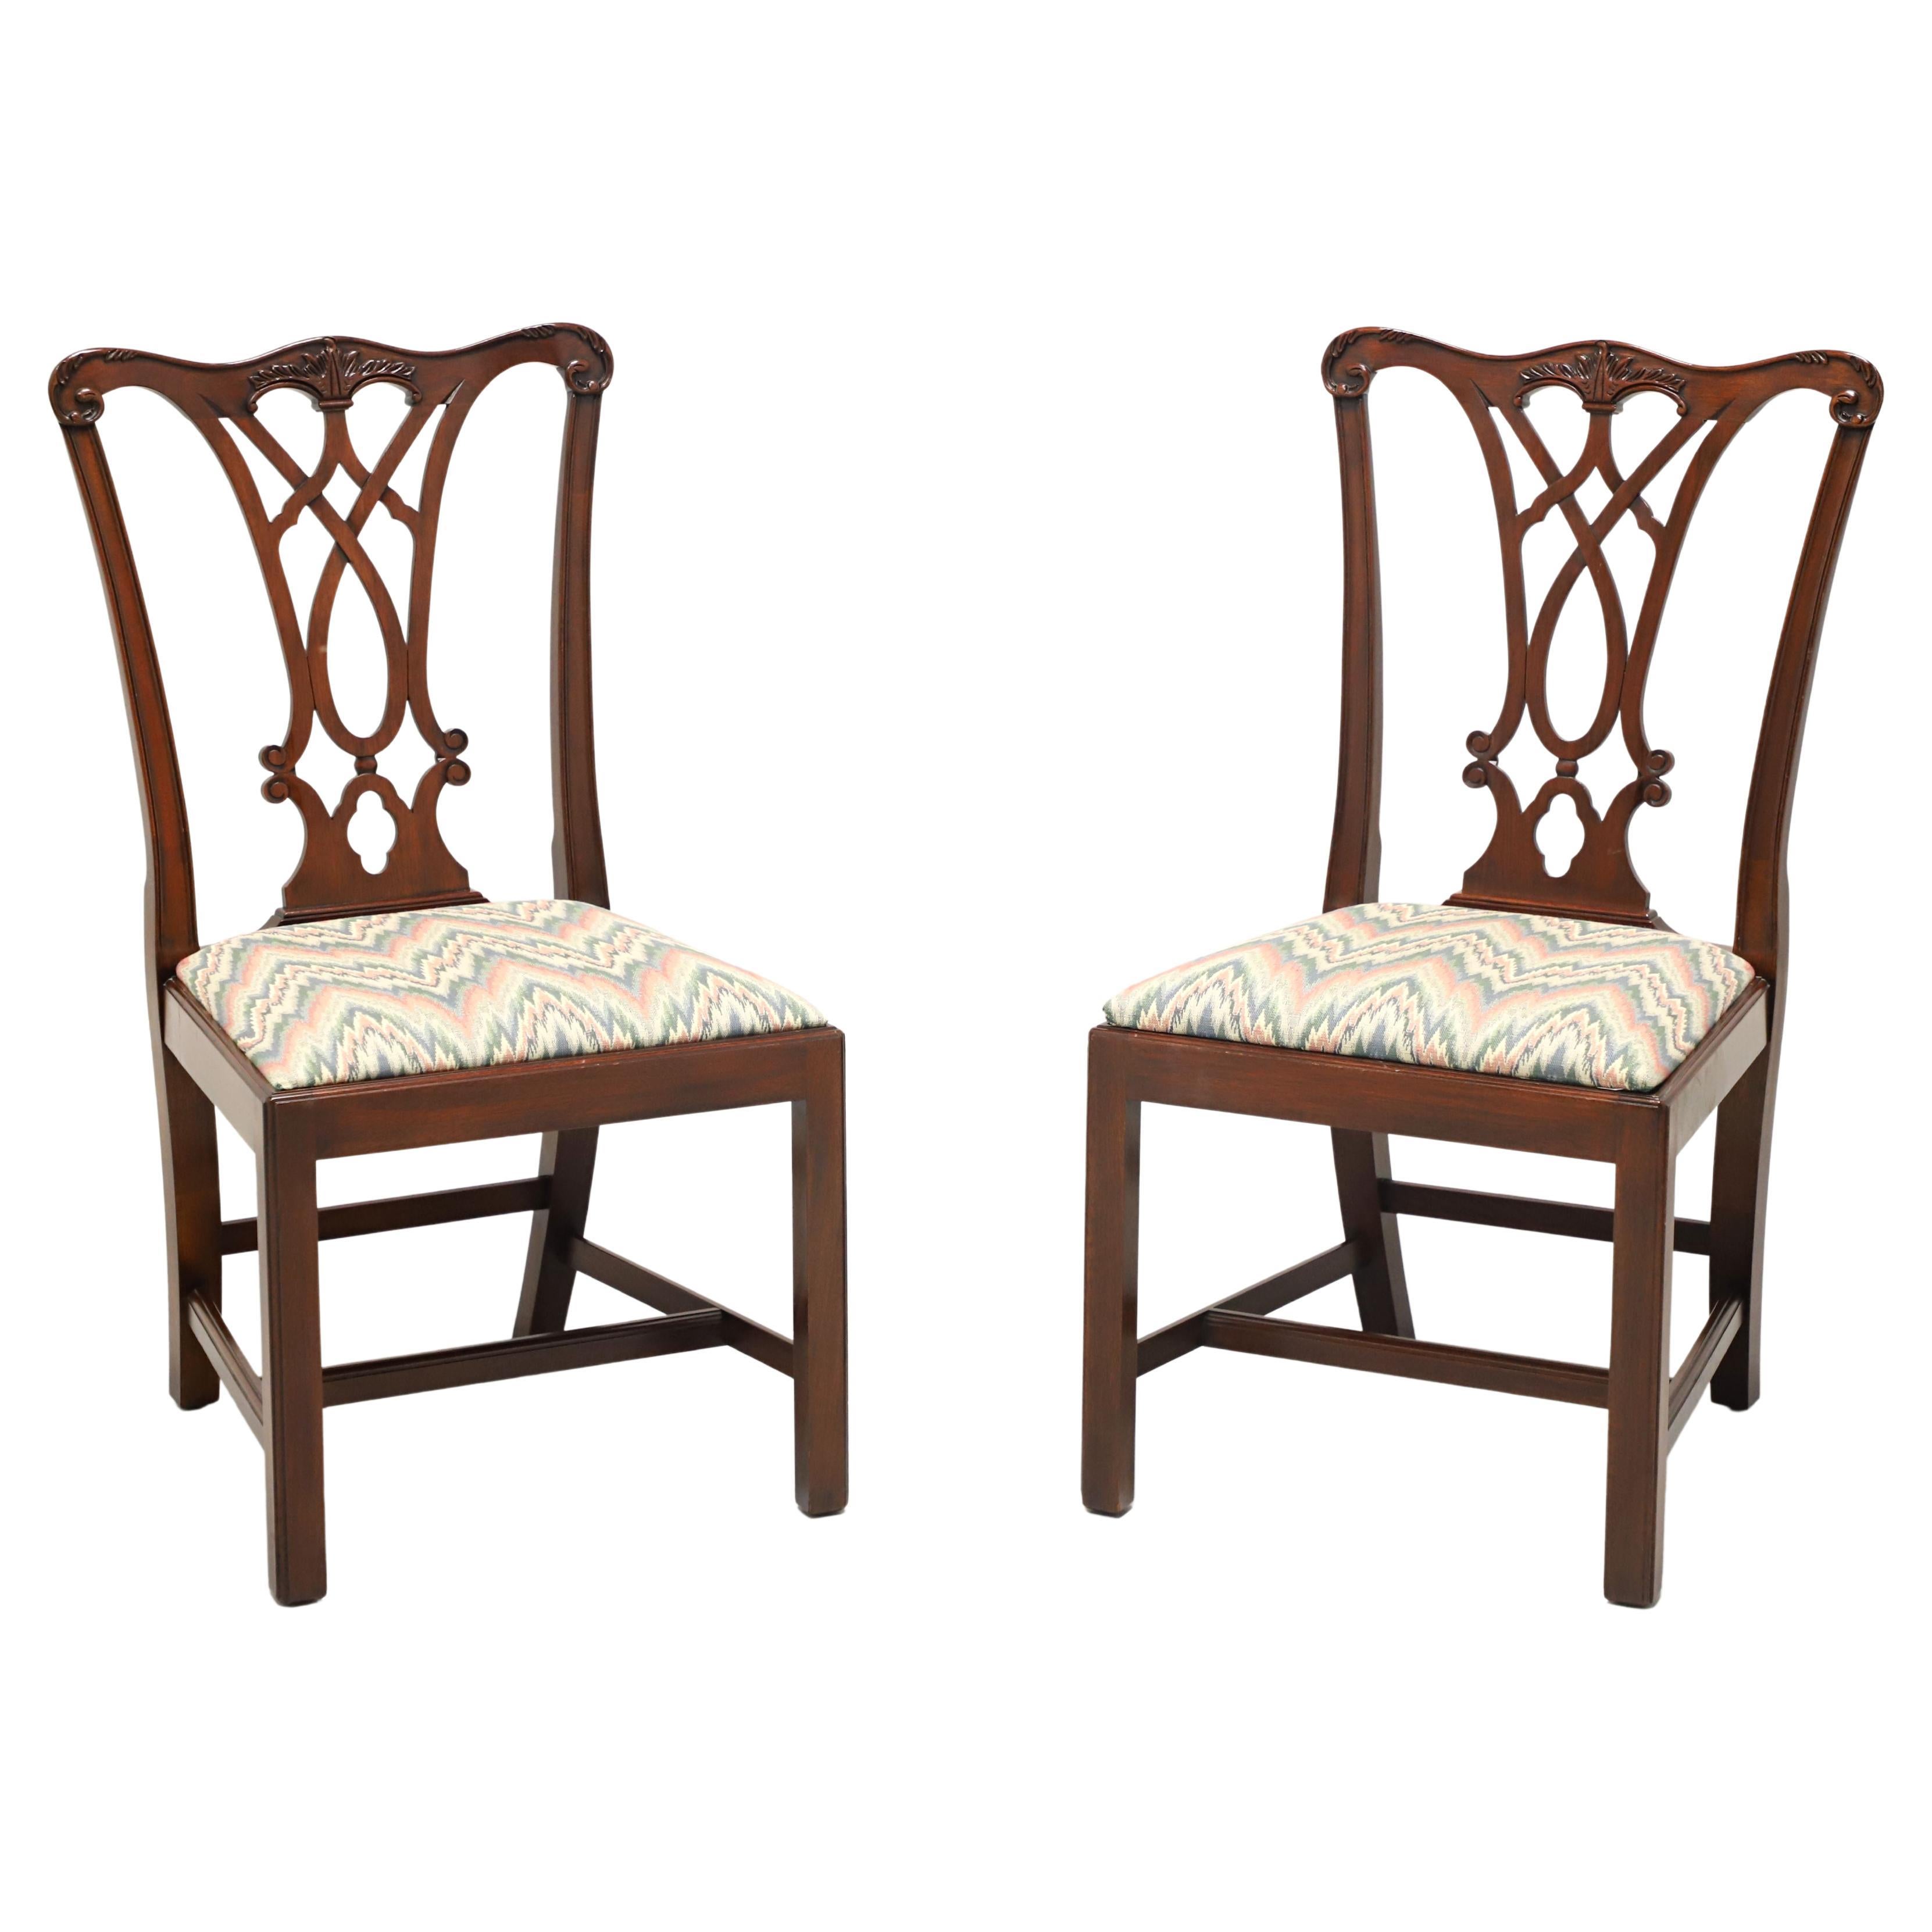 HENKEL HARRIS 107S 29 Mahogany Chippendale Dining Side Chairs - Pair B